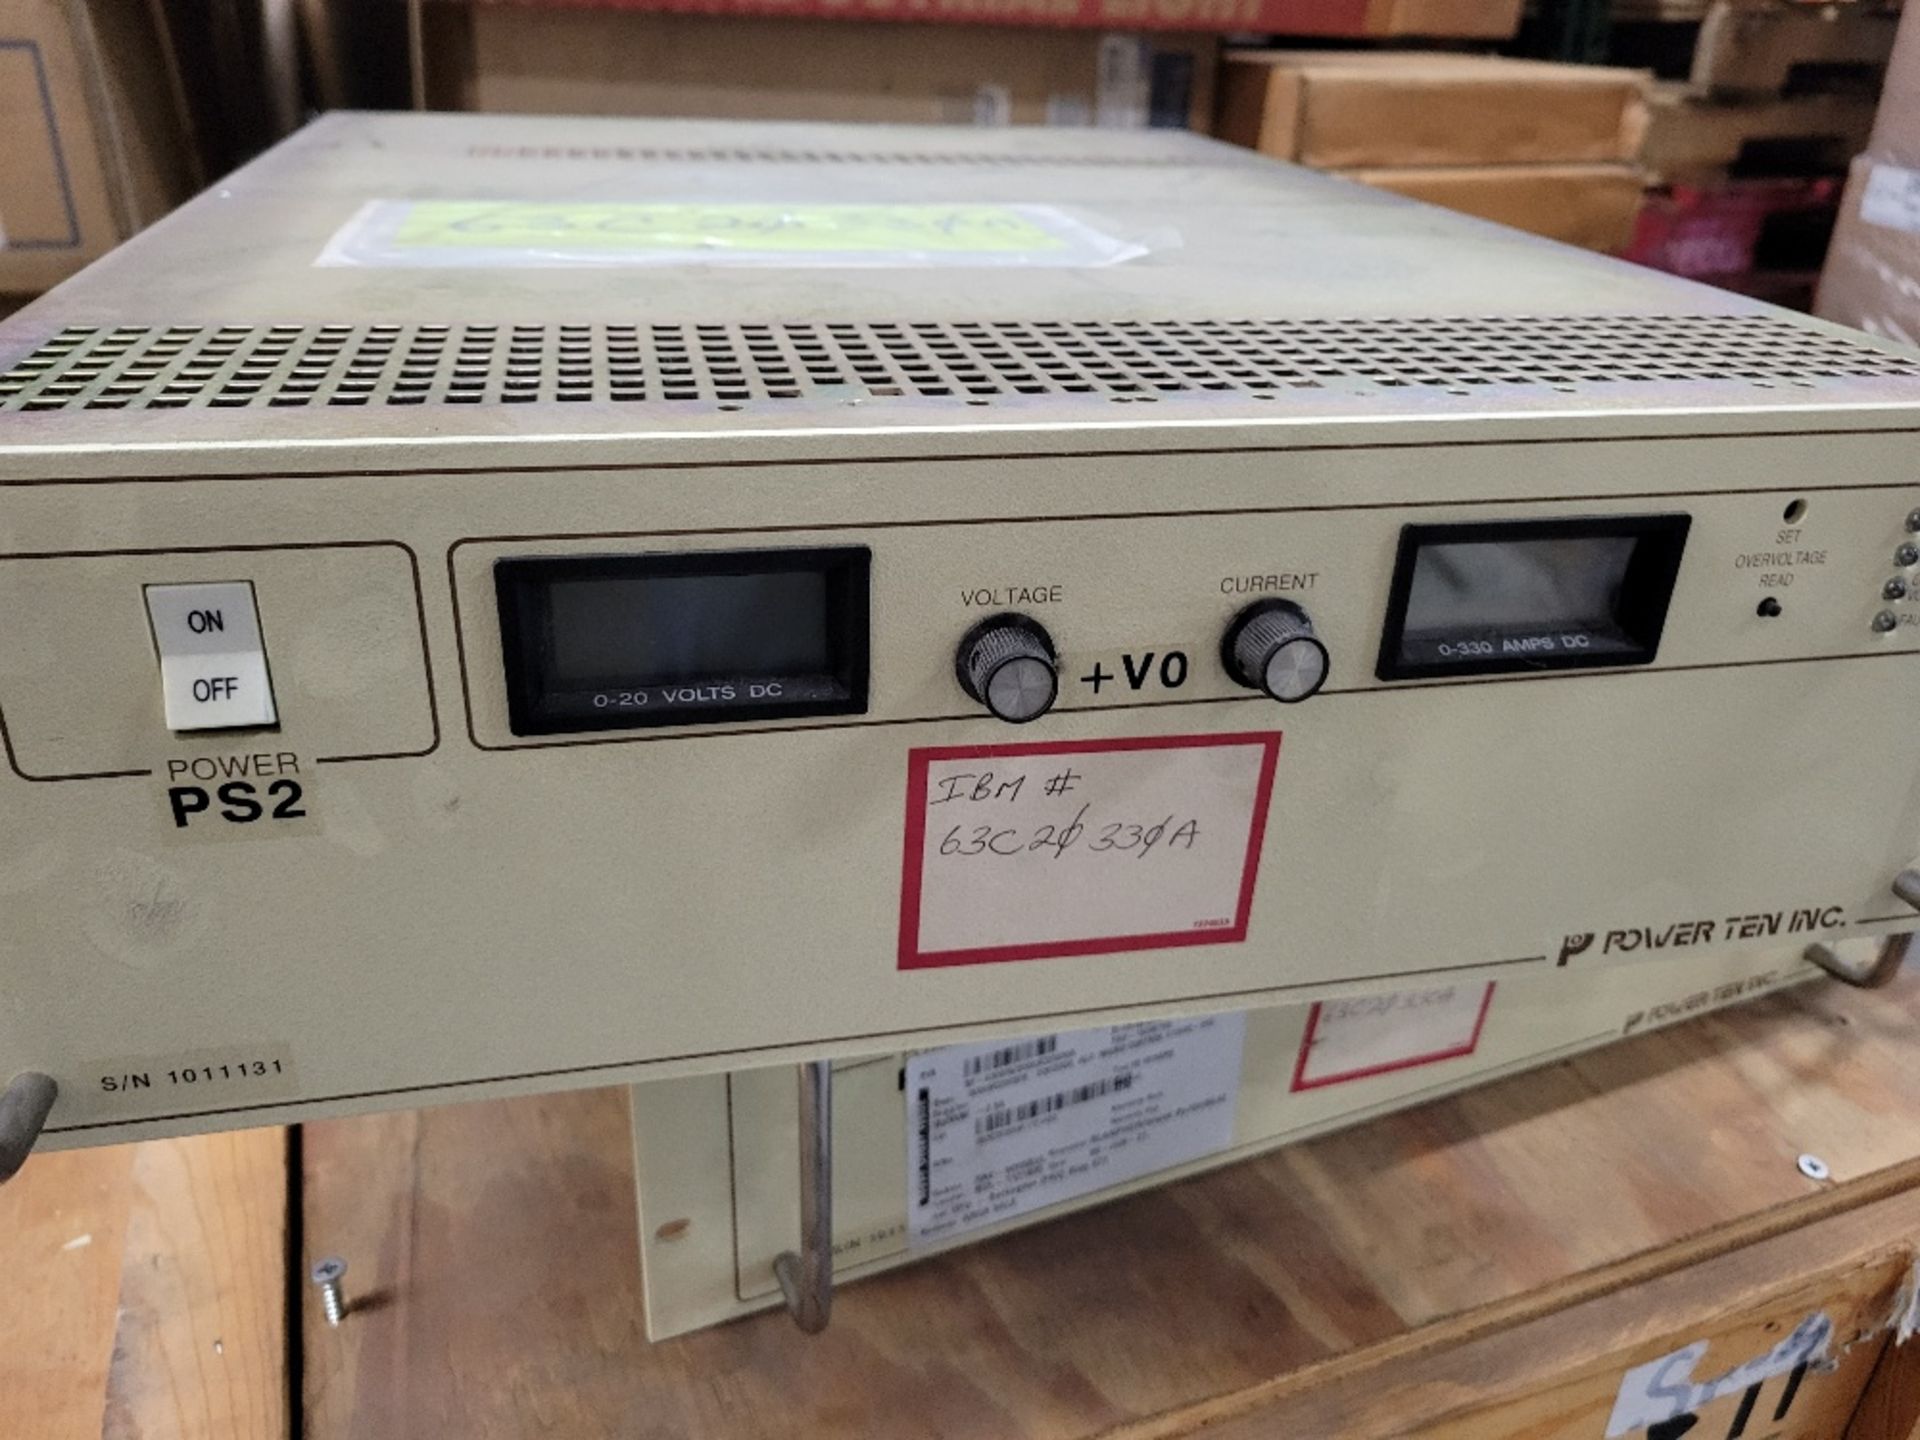 1x Power Ten Used Surplus SF-430836 Other Power Supplies 330A 20VDC 3W - Image 2 of 3